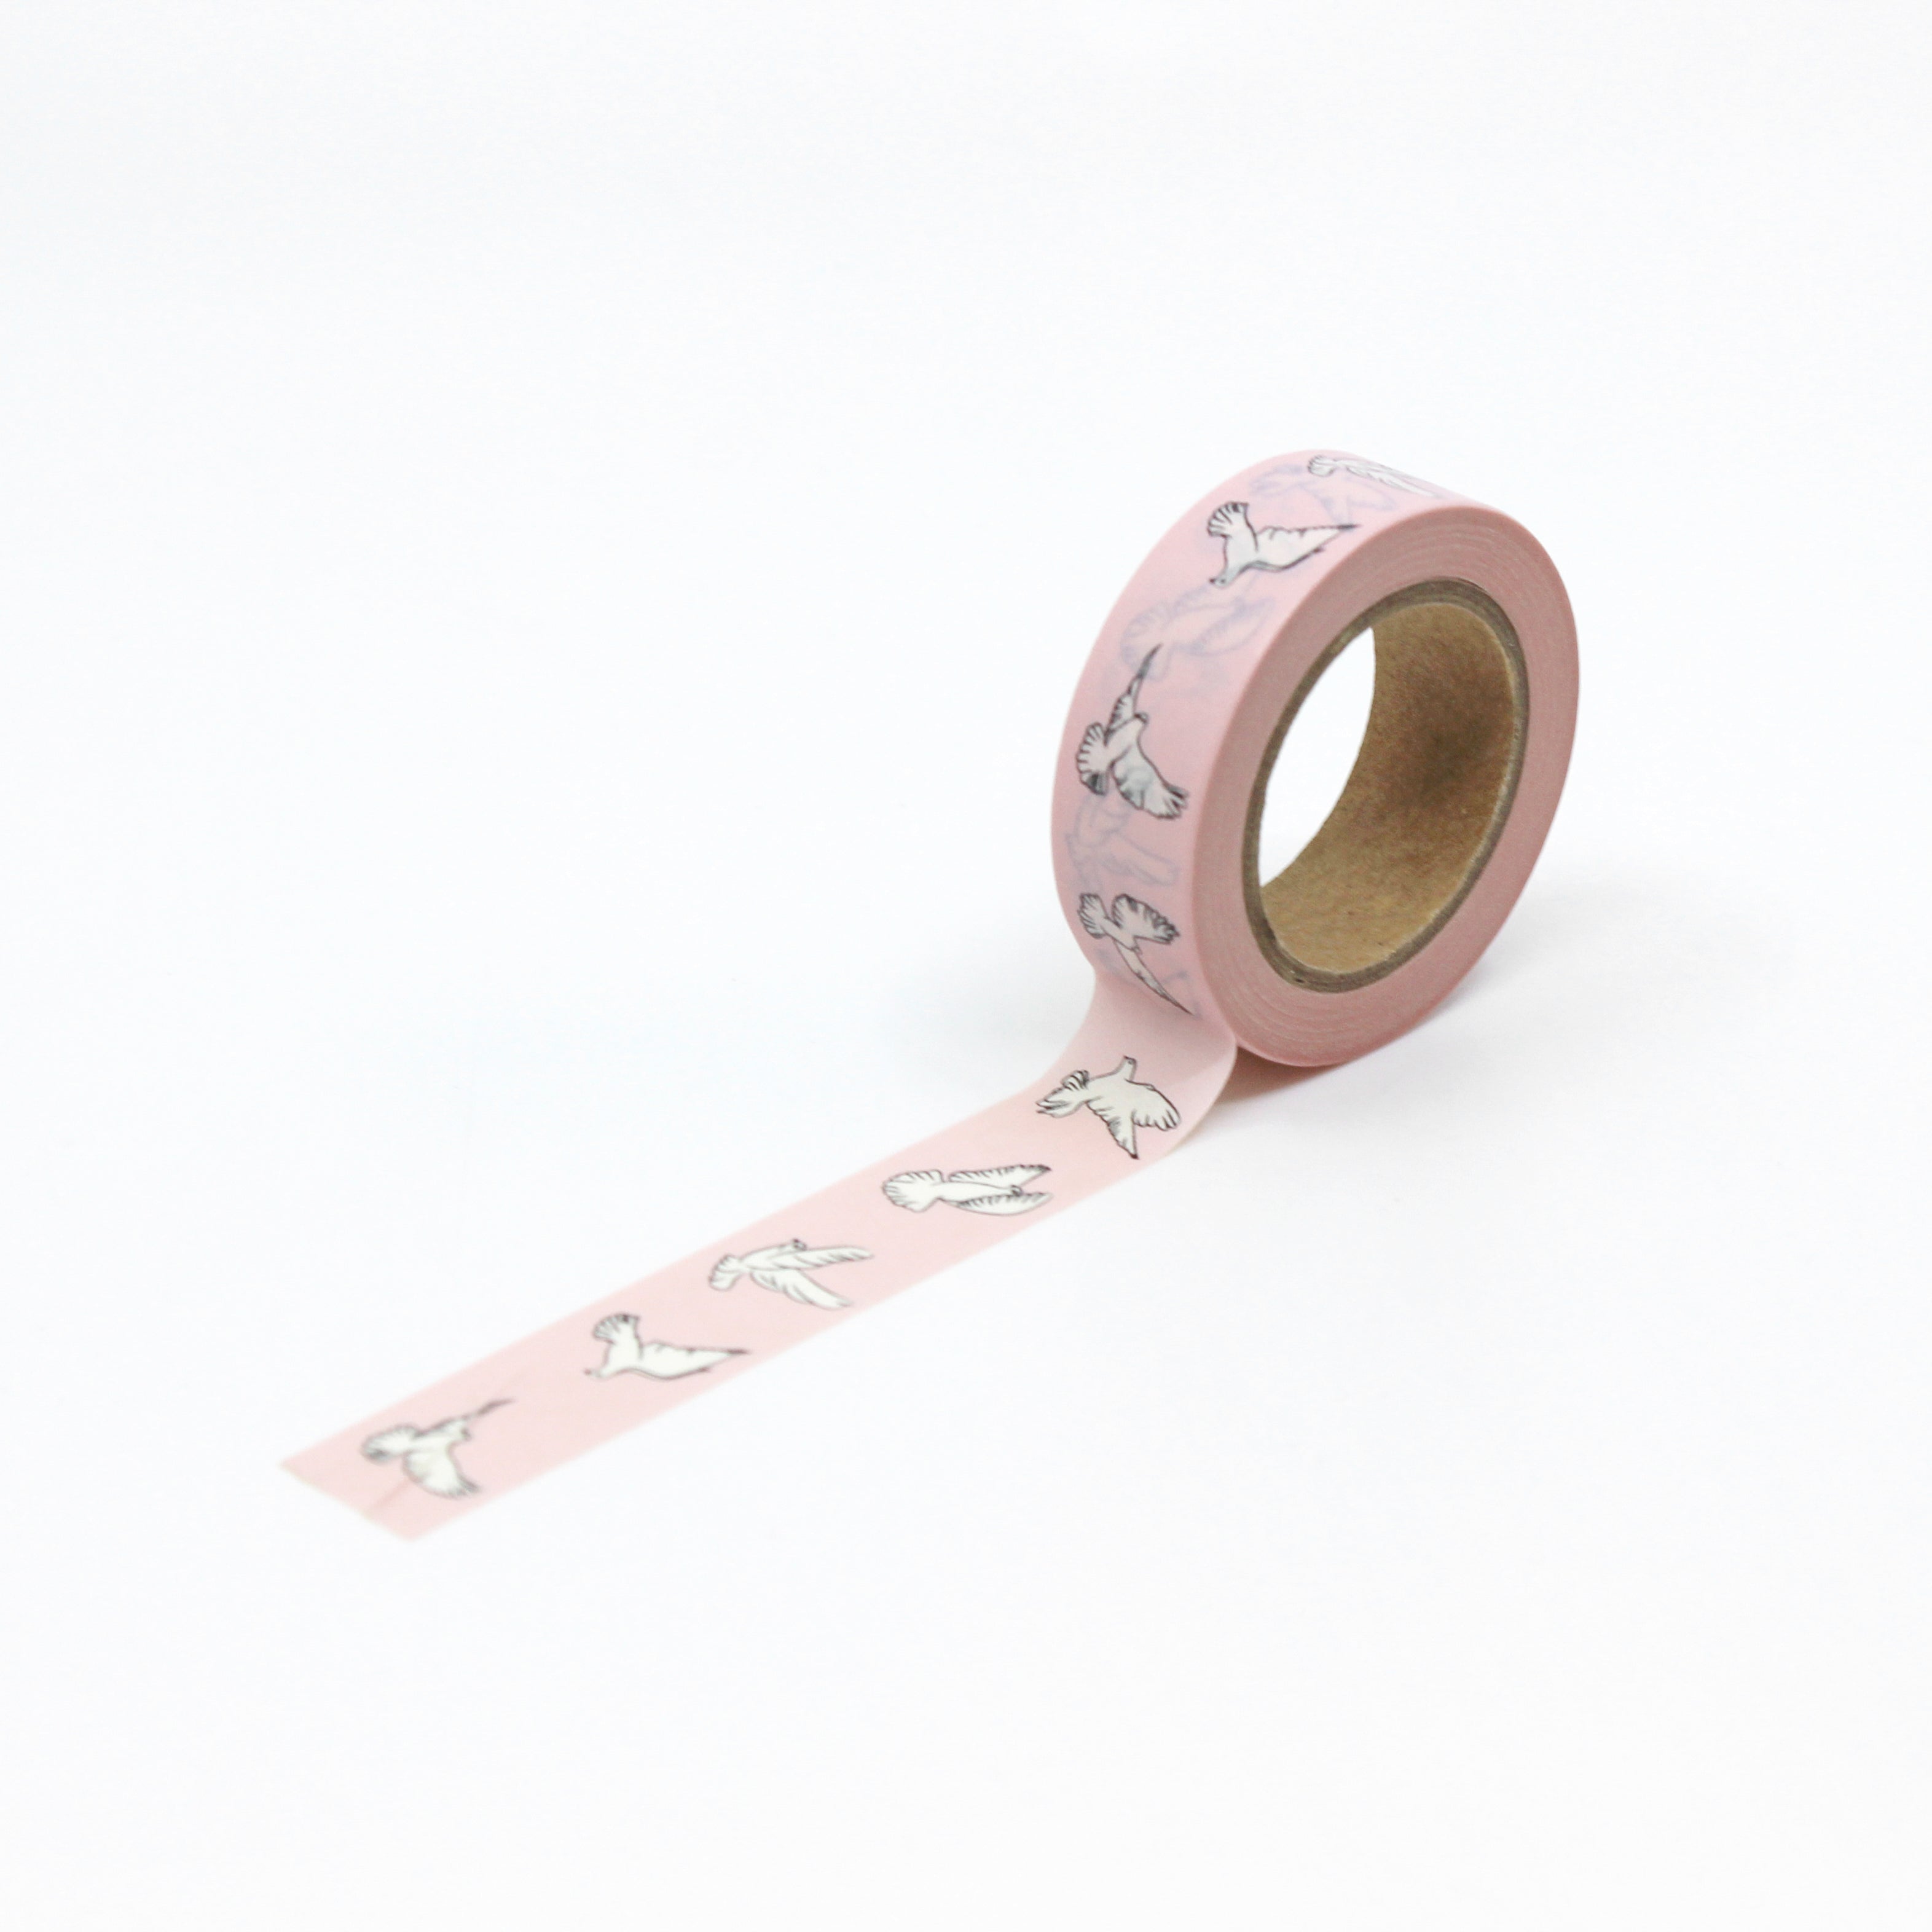 This is a full pattern repeat view of pink dove washi tape BBB Supplies Craft Shop